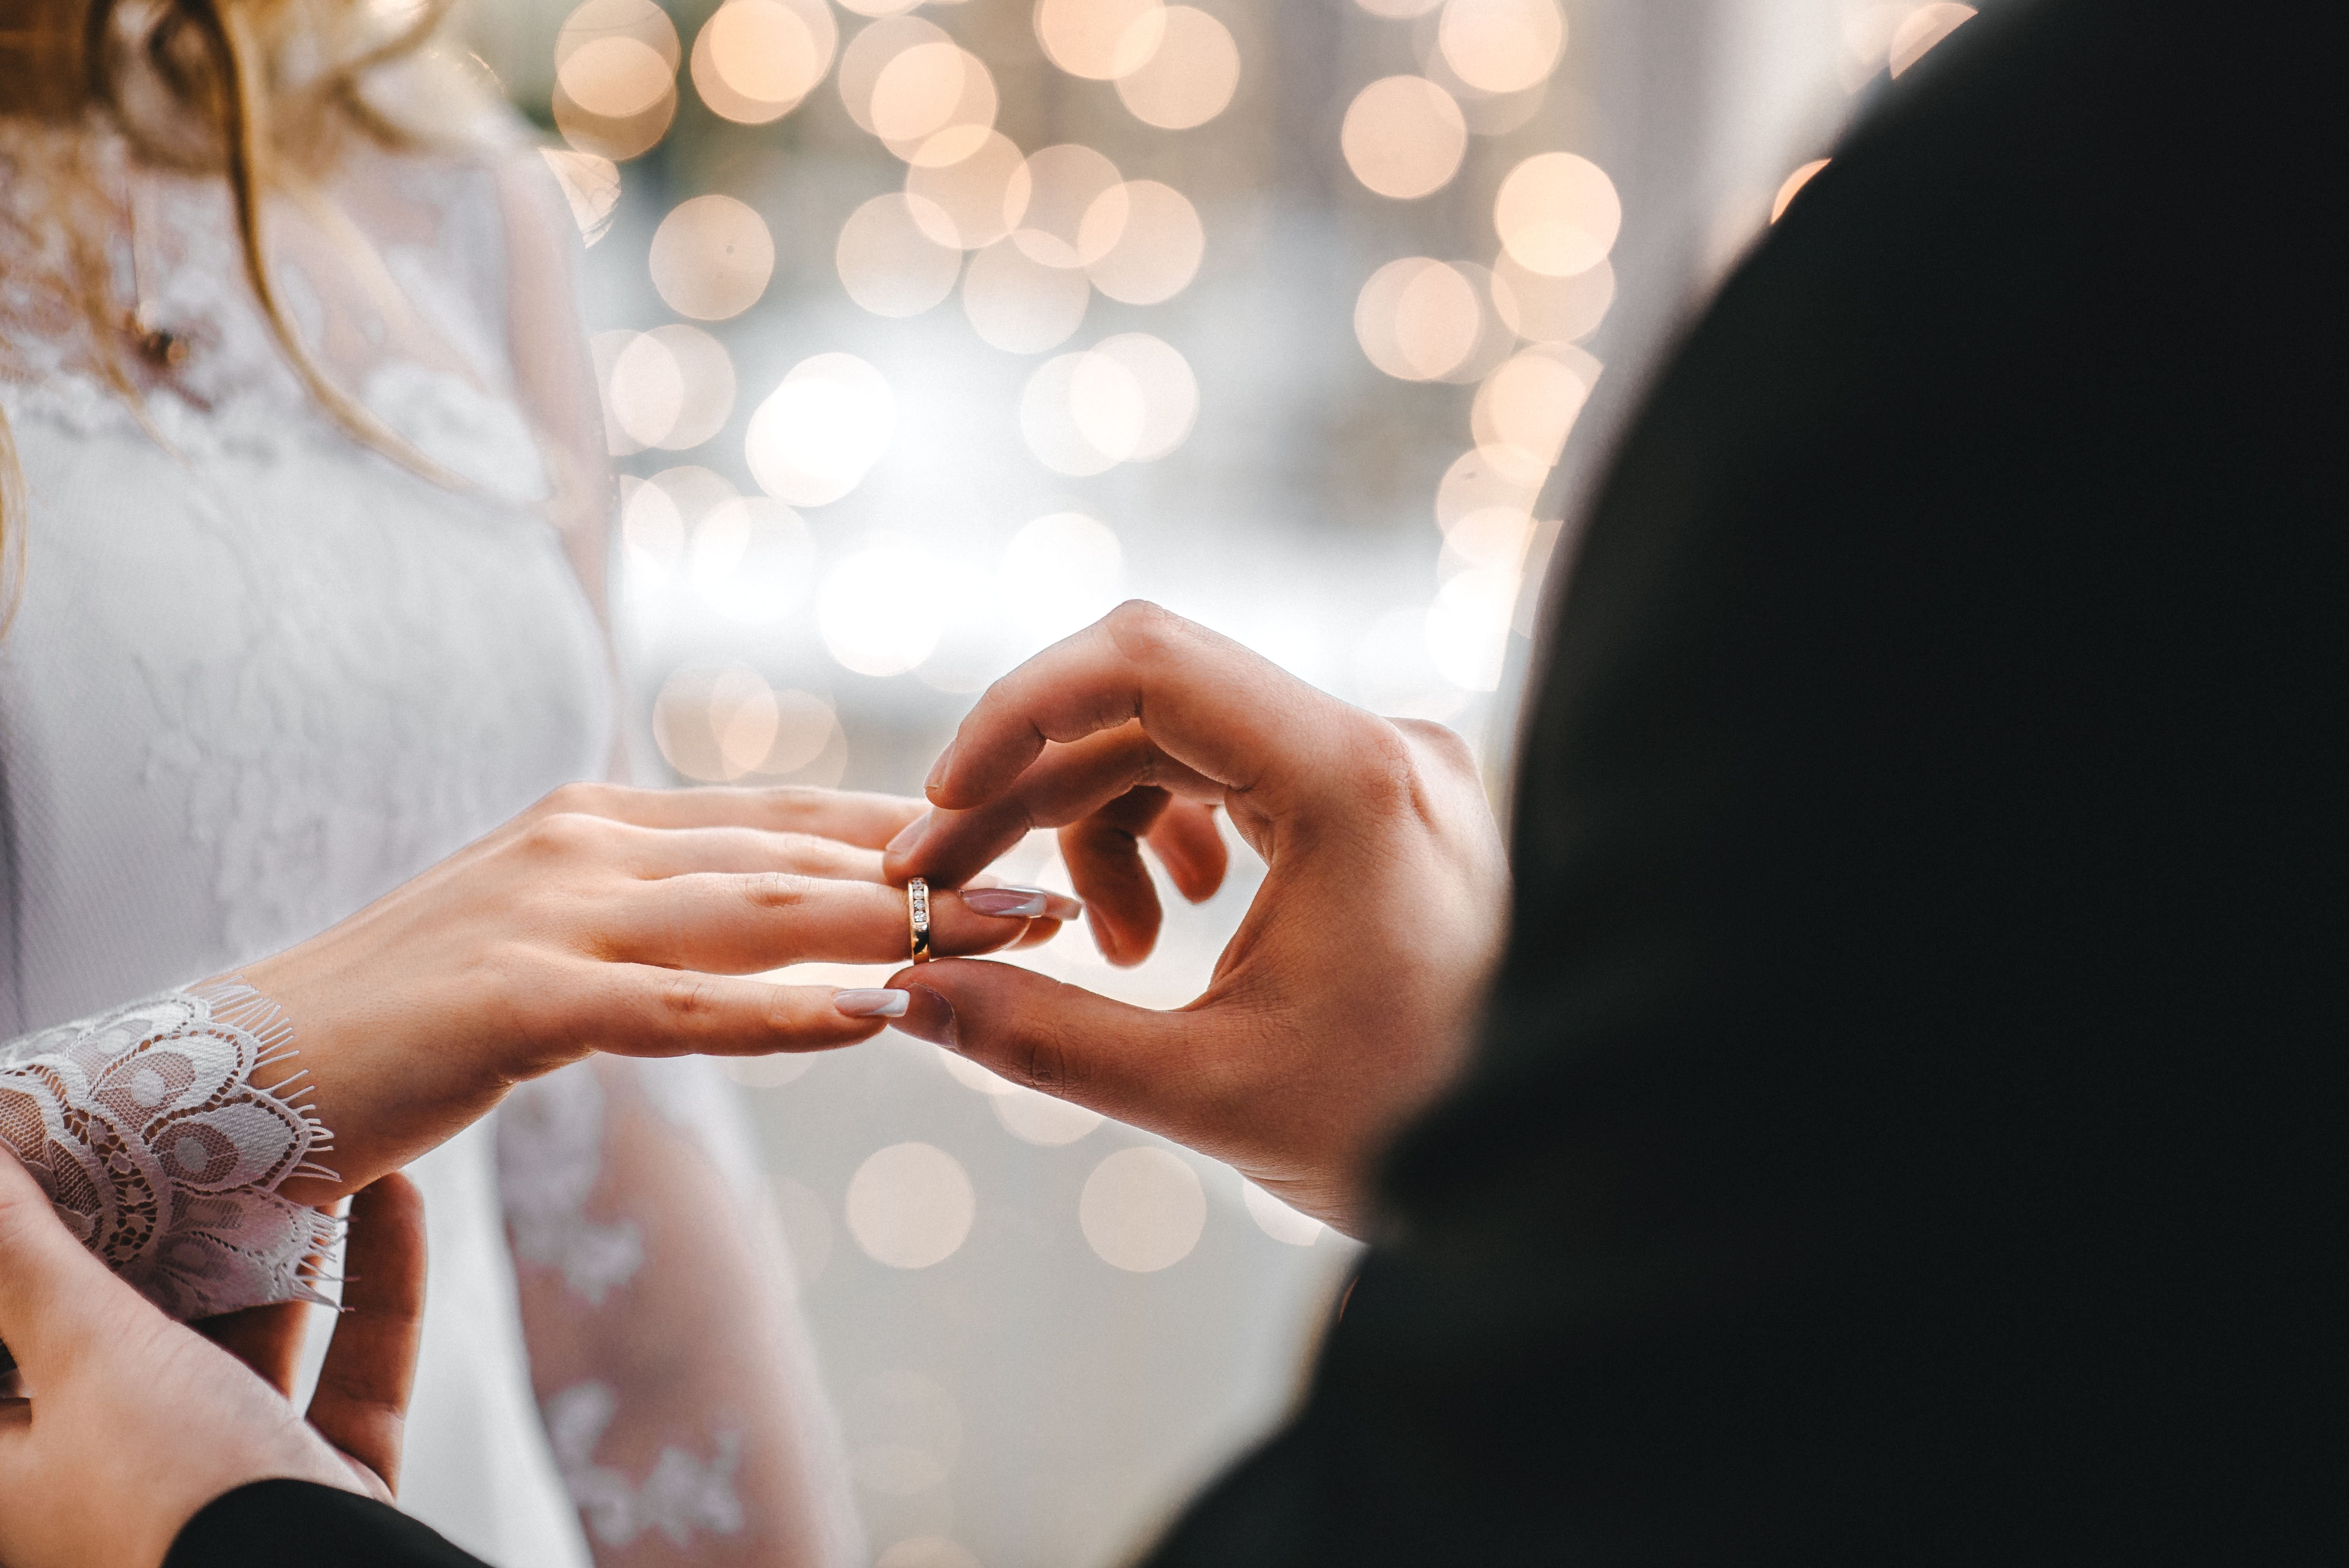 A groom places the wedding ring on his bride's finger. | Source: Shutterstock